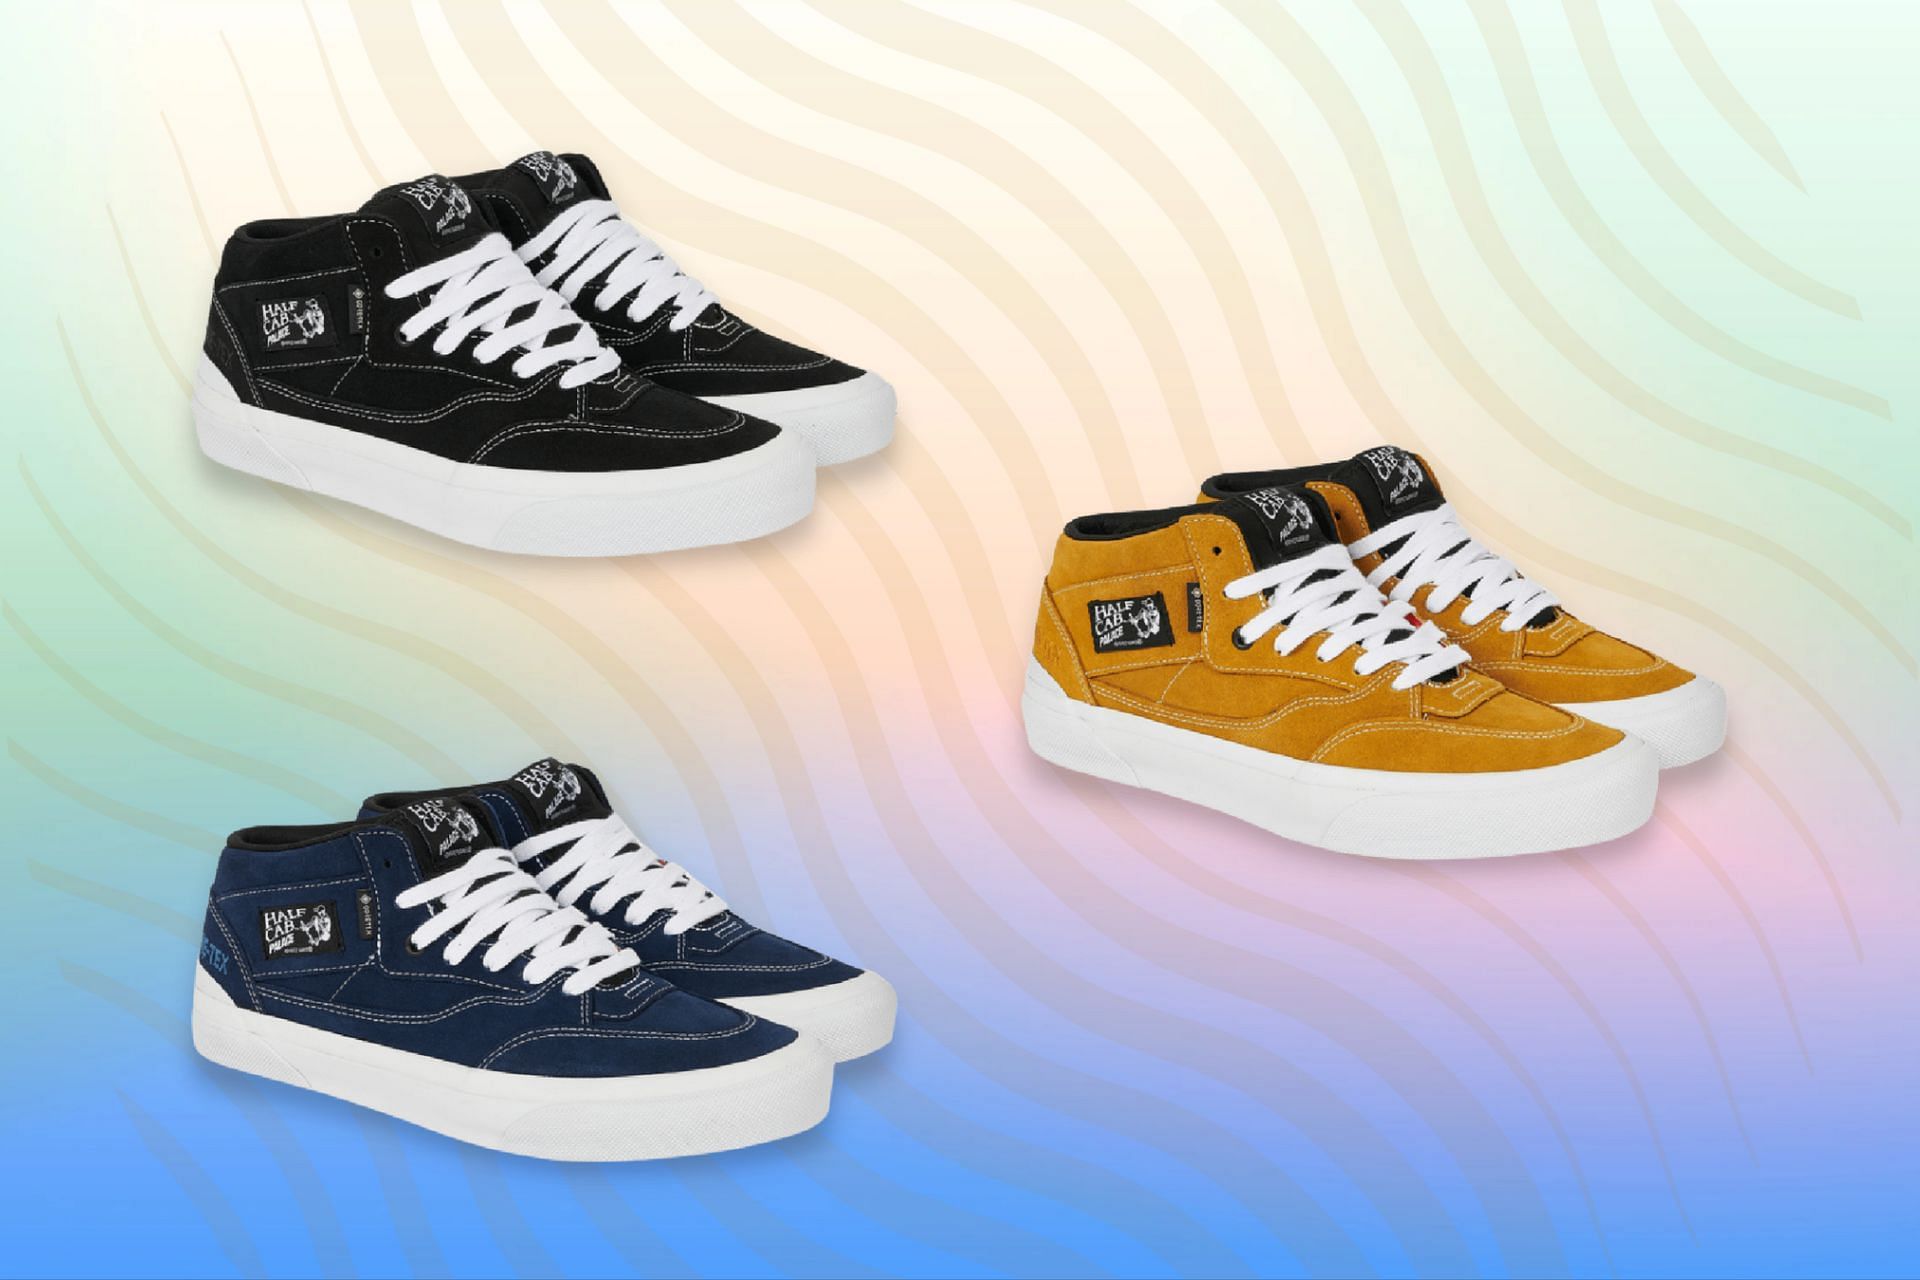 Vans Palace Skate Half Cab Gore-Tex sneaker collection: Where to buy, price, release date, and more explored